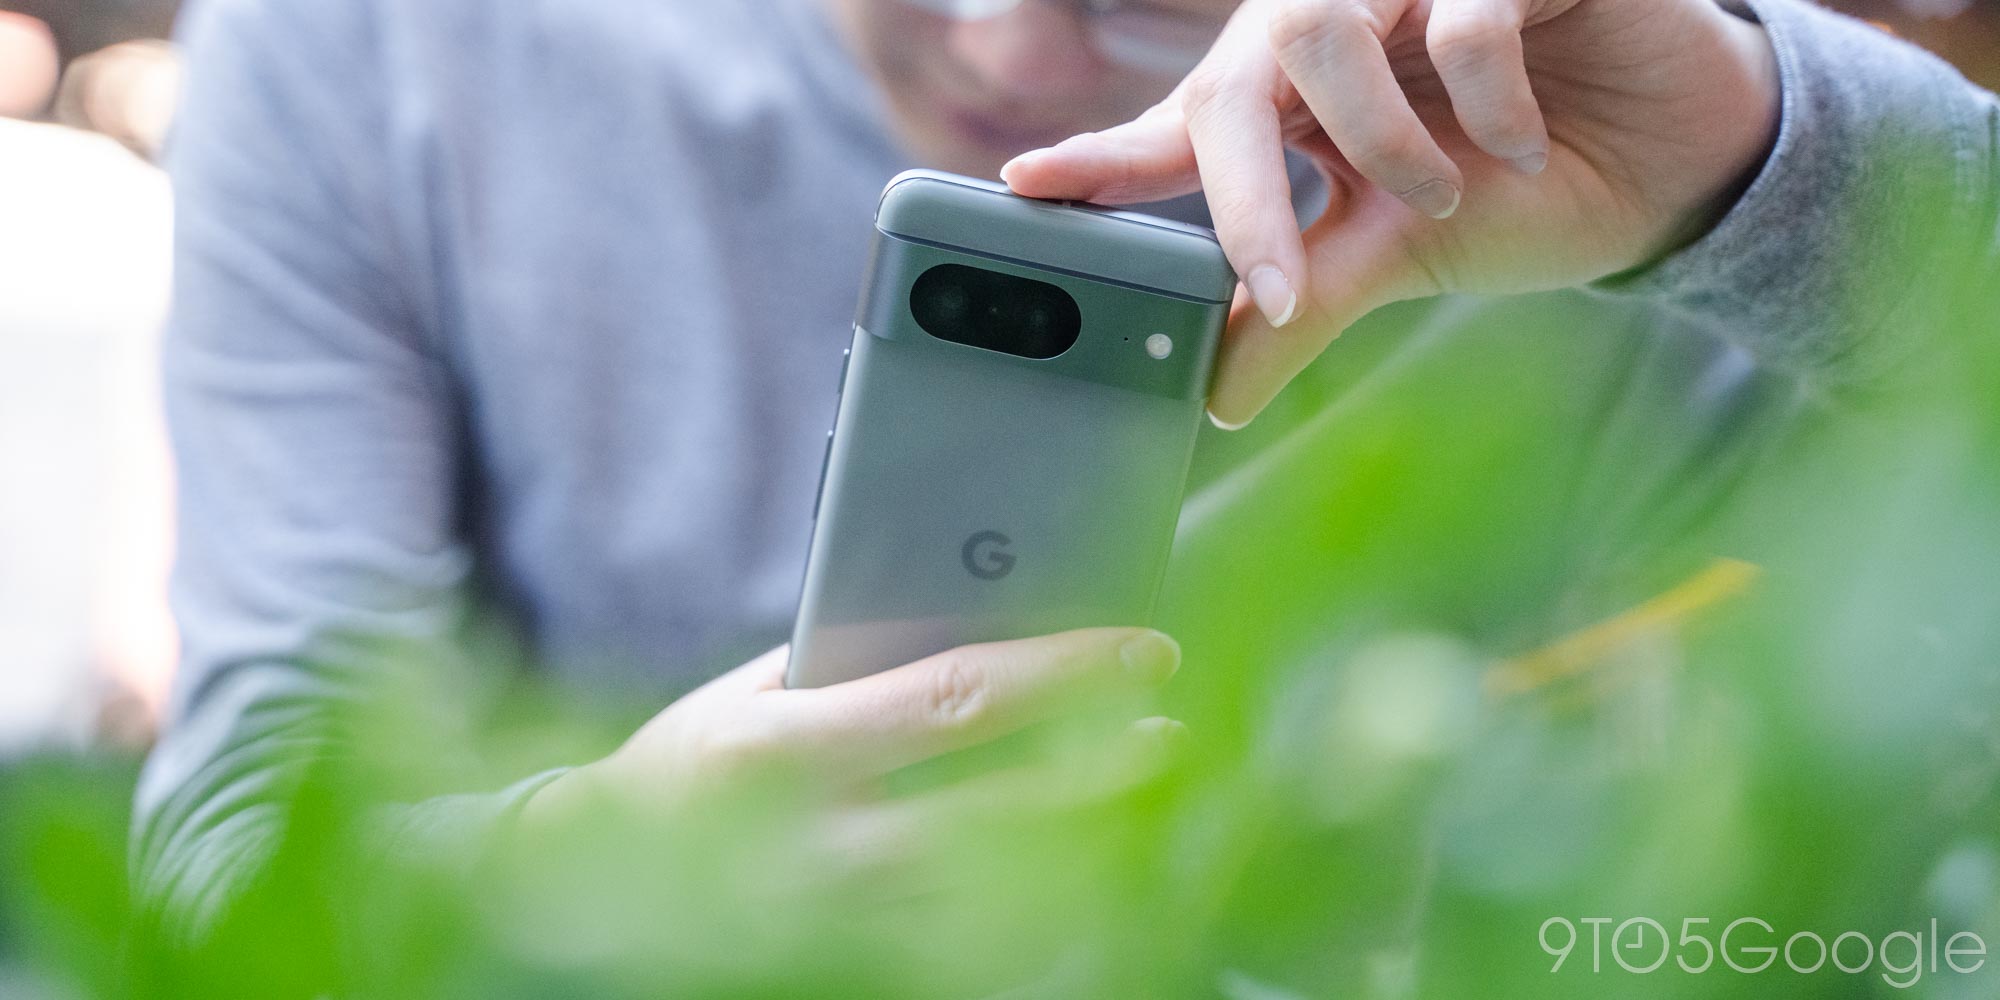 Google Pixel 6 Pro hands-on: what we like (and don't like) so far